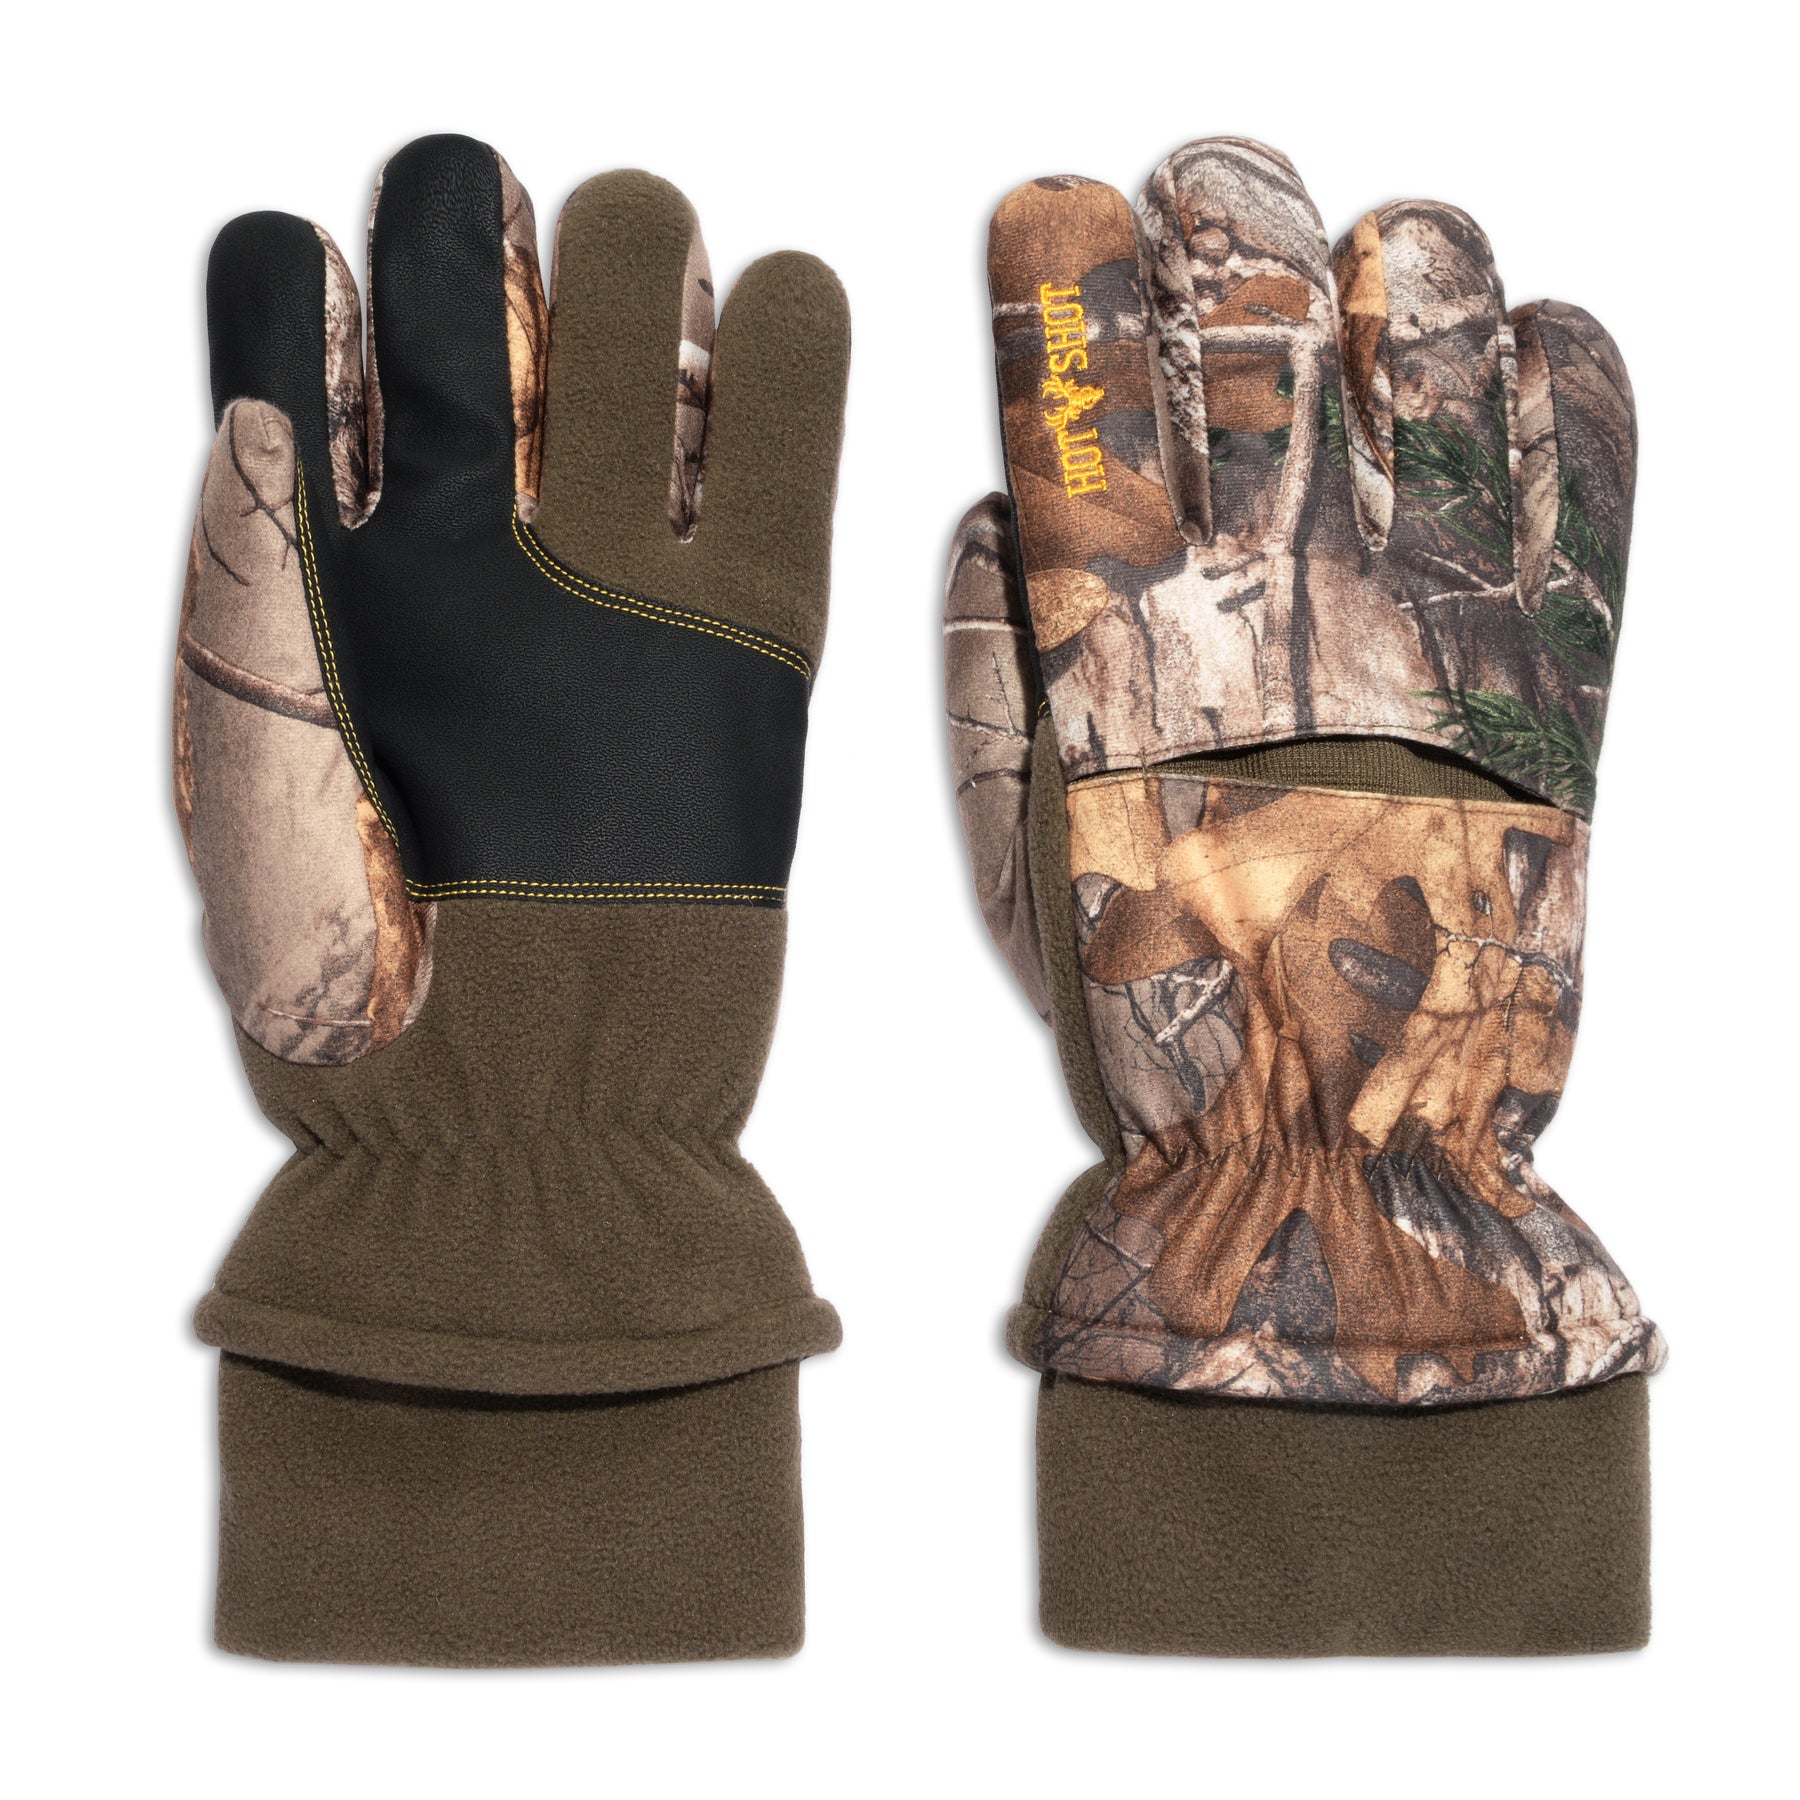 Mens Aggressor Waterpoof Insulated Realtree Camo Hunting Glove